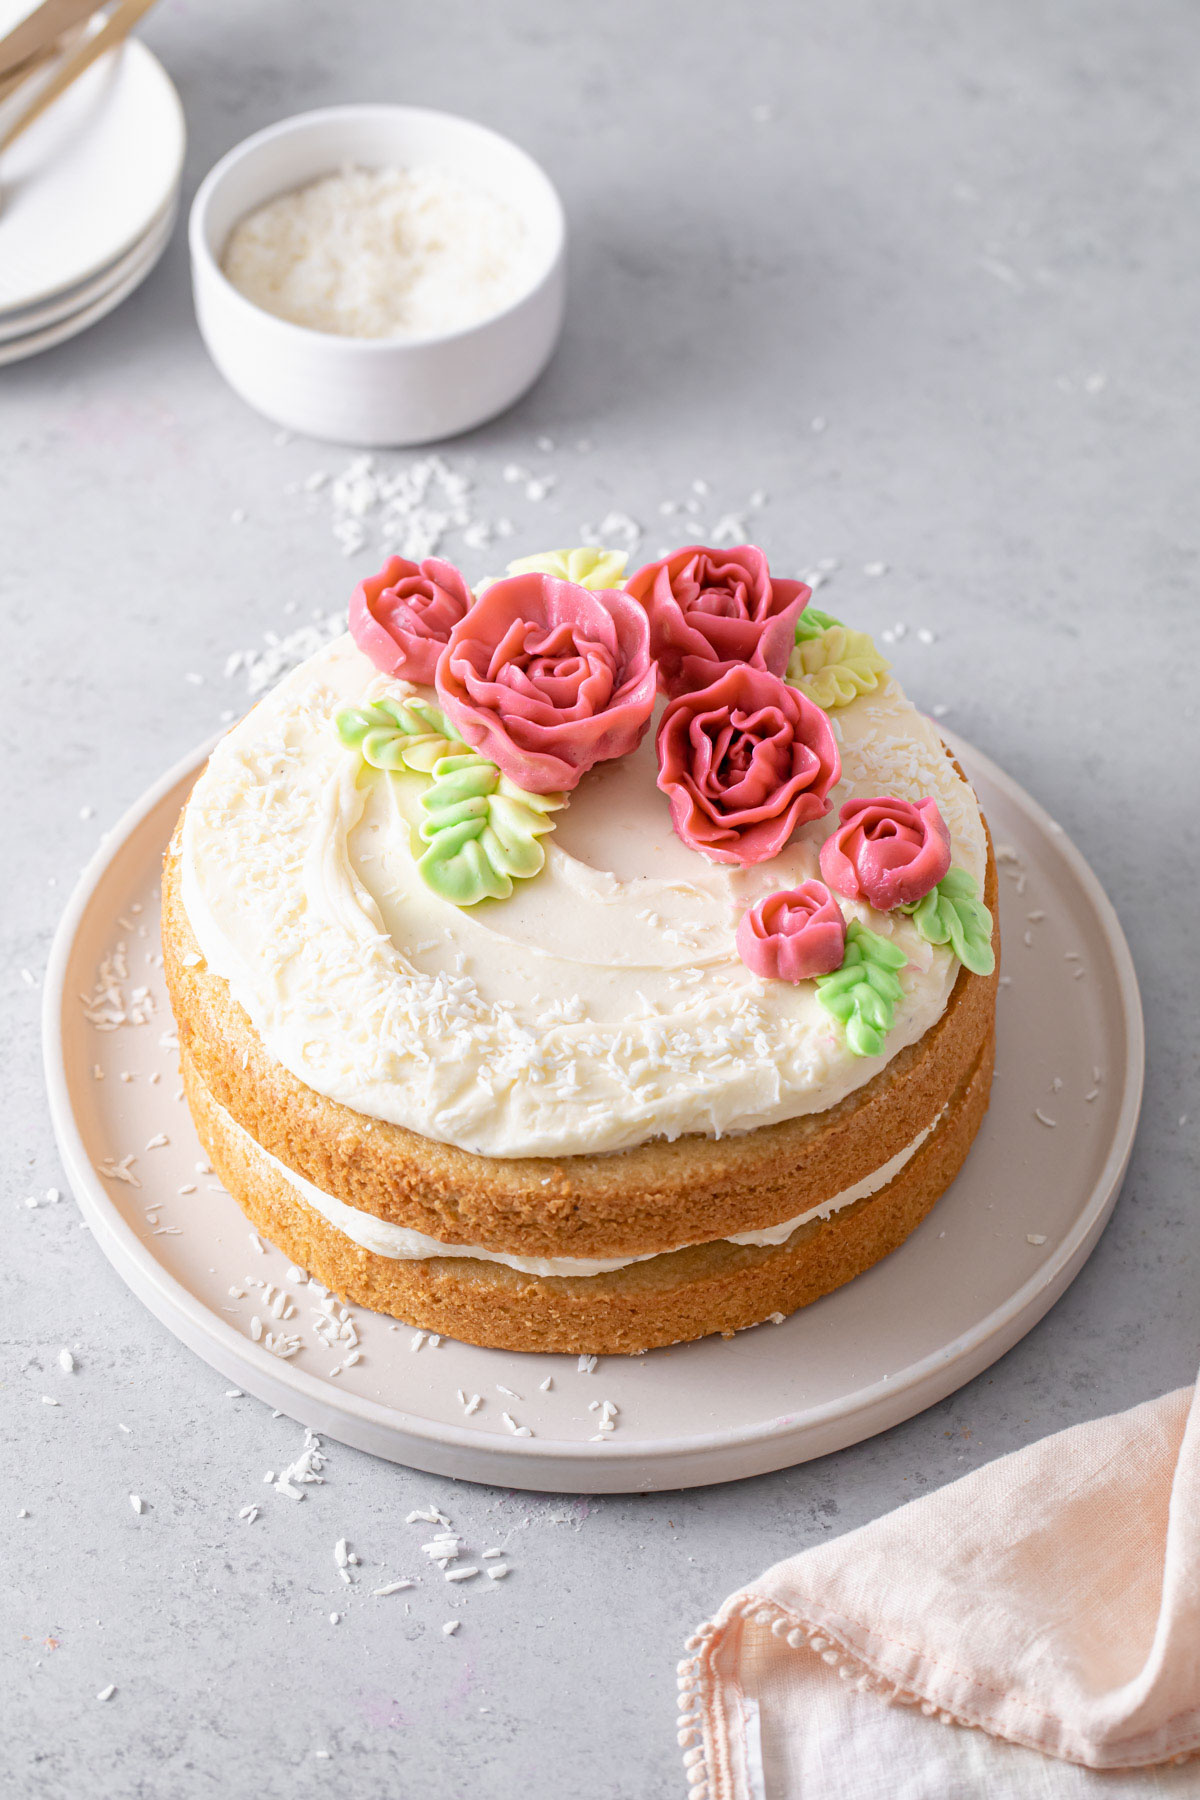 An almond layer cake with cream cheese frosting and pink buttercream rose on top